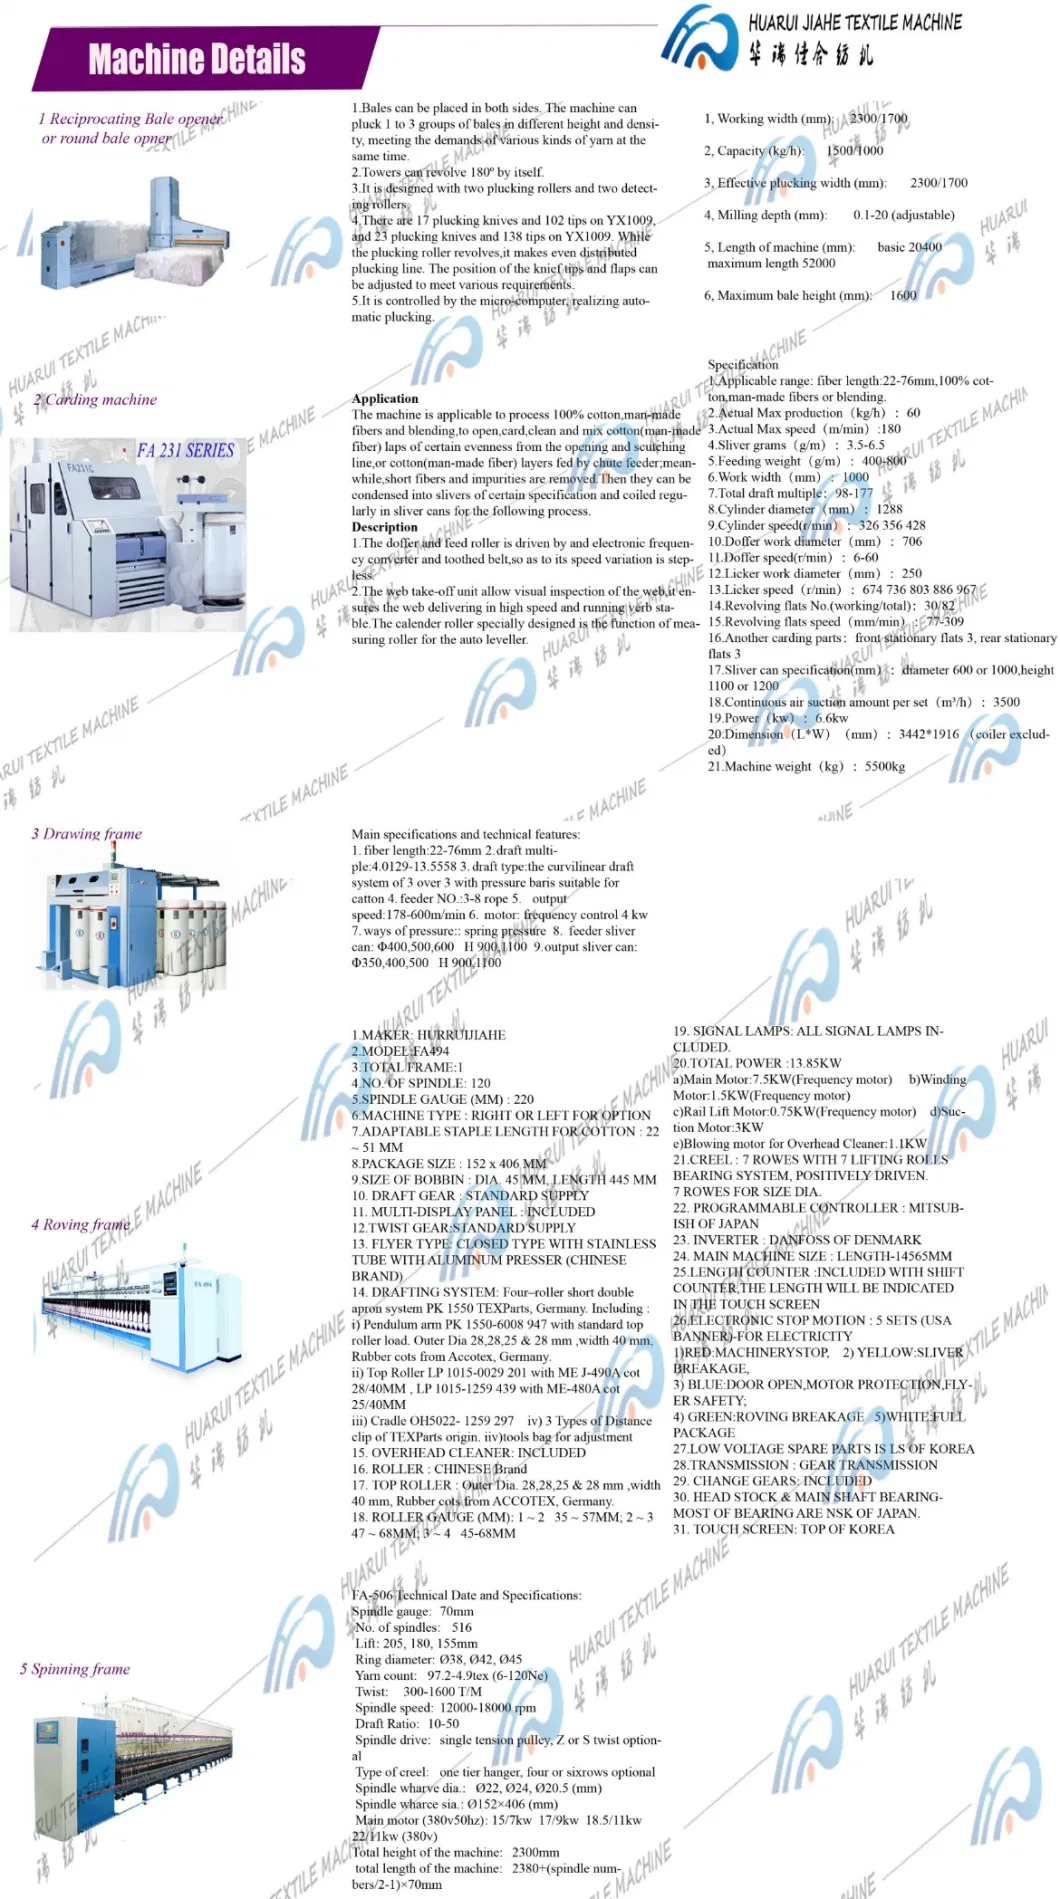 Cheapest Price for Textile Thread, Dryer Machine for Sewing Yarn, Yarn Drying Machine for Sales Textile Spinning Yarn Machines with Dyeing and Dyring Processing